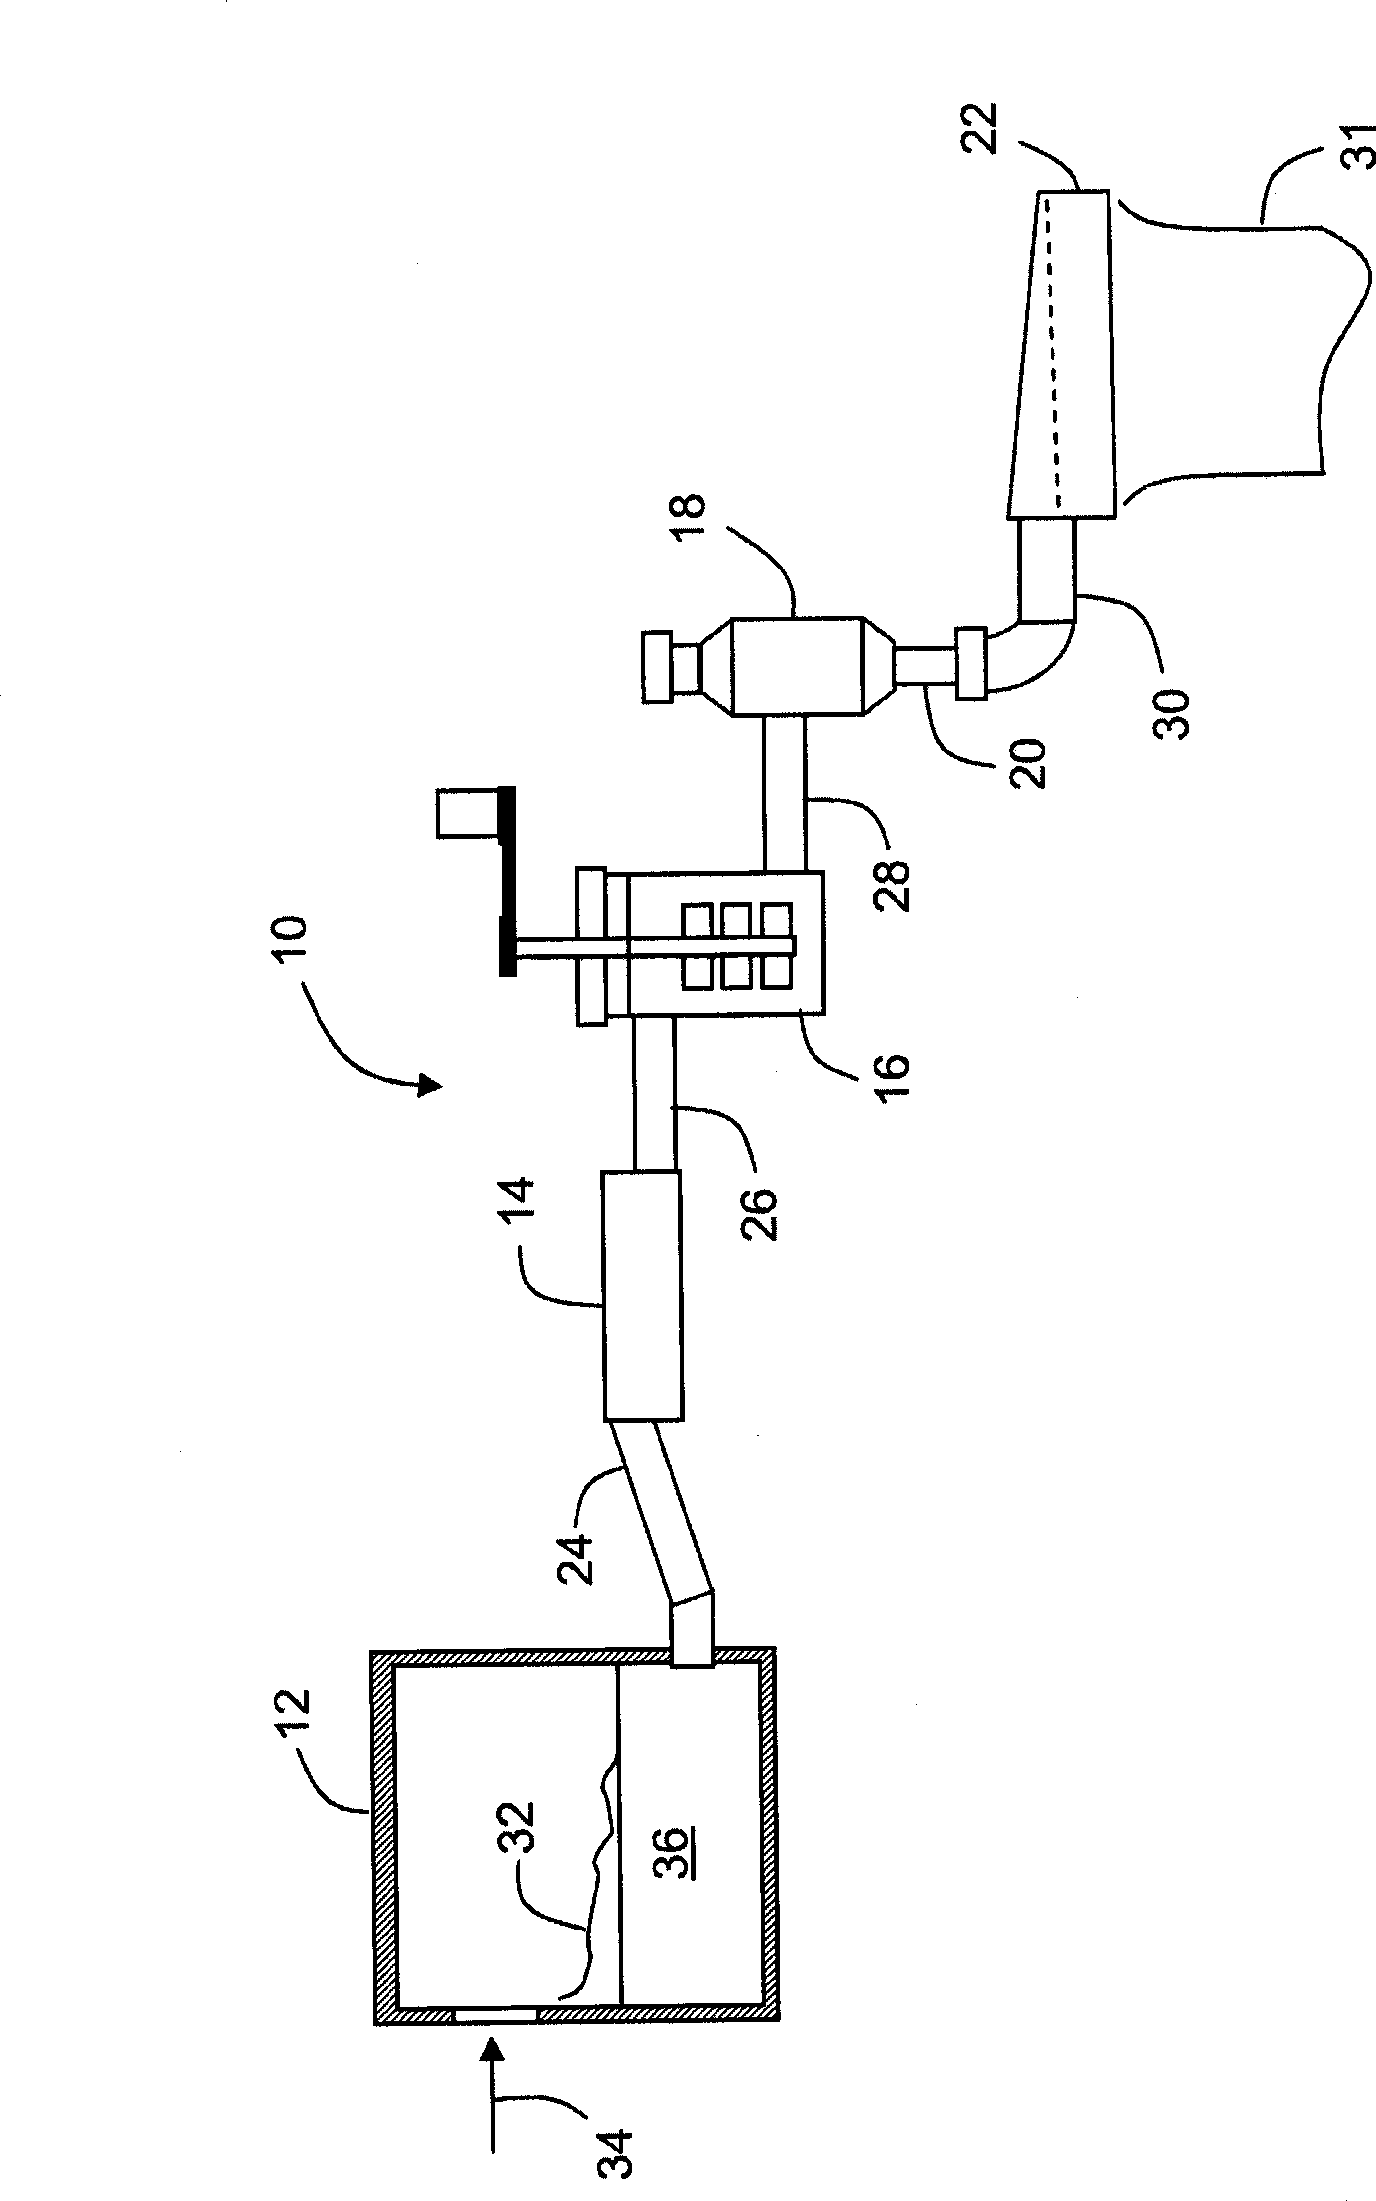 Method for eliminating carbon contamination of platinum-containing components for a glass making apparatus